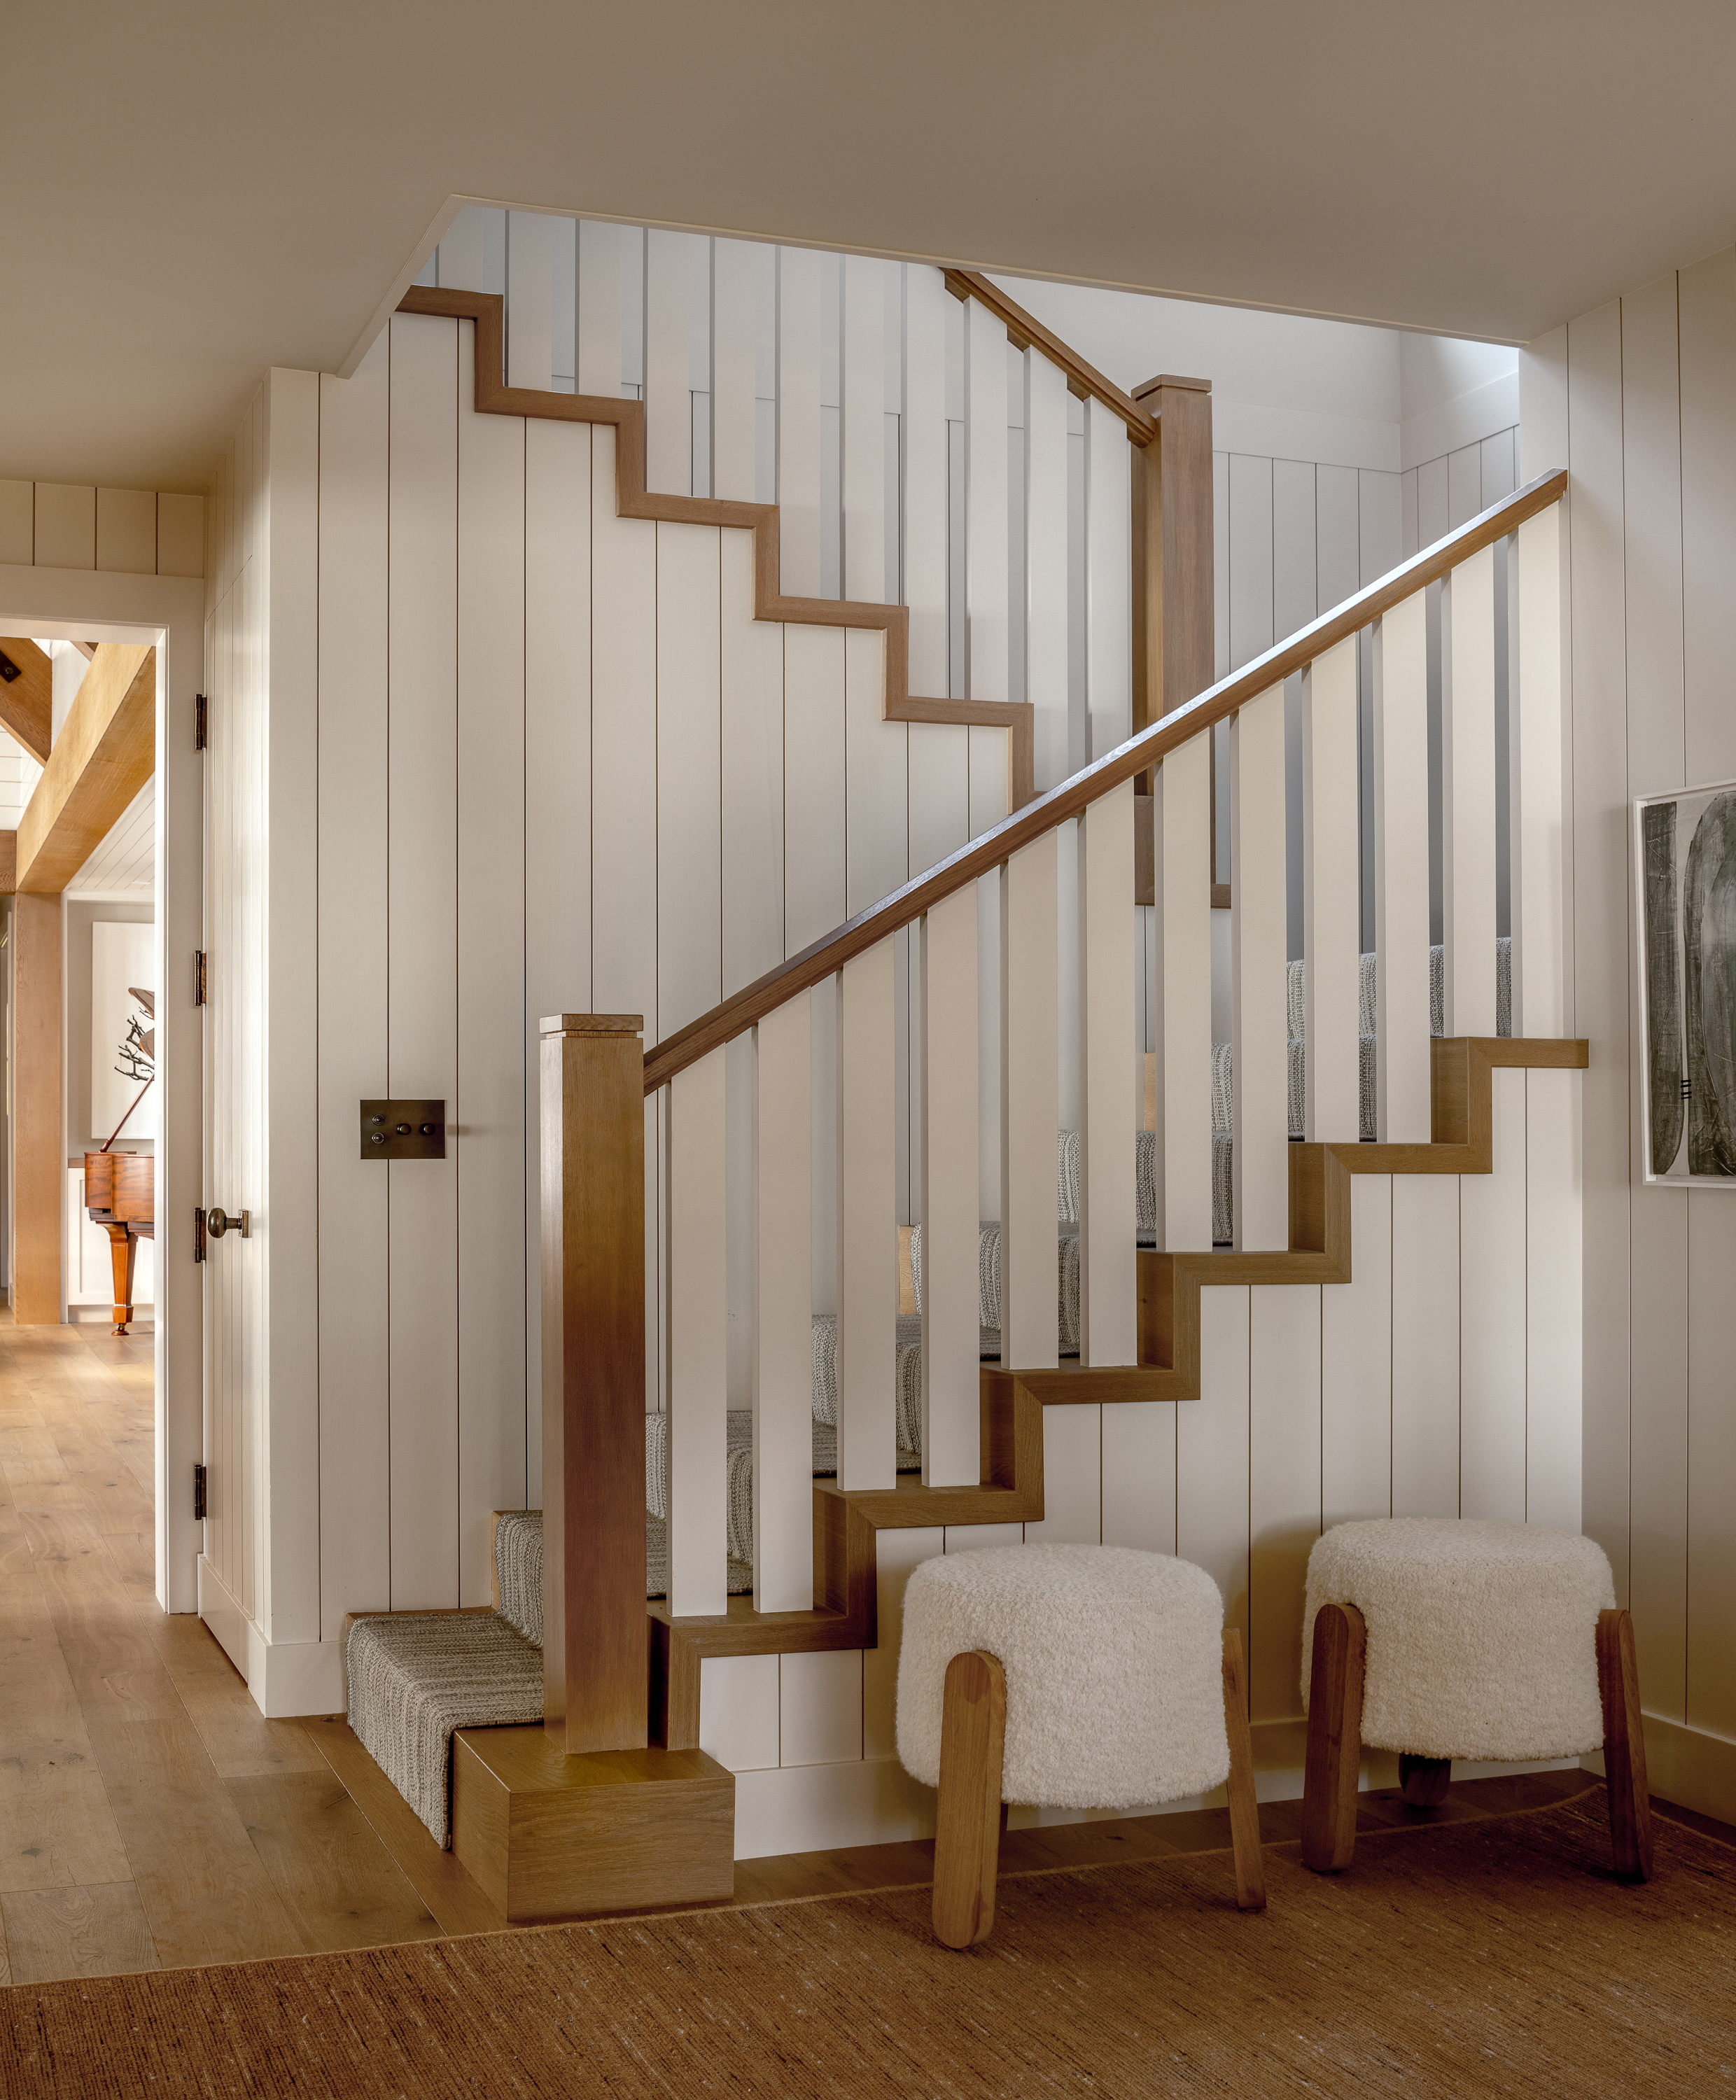 An additional photo in the entry showcases the custom stairwell design, highlighting the blend of craftsmanship and architectural elegance in the home's interior